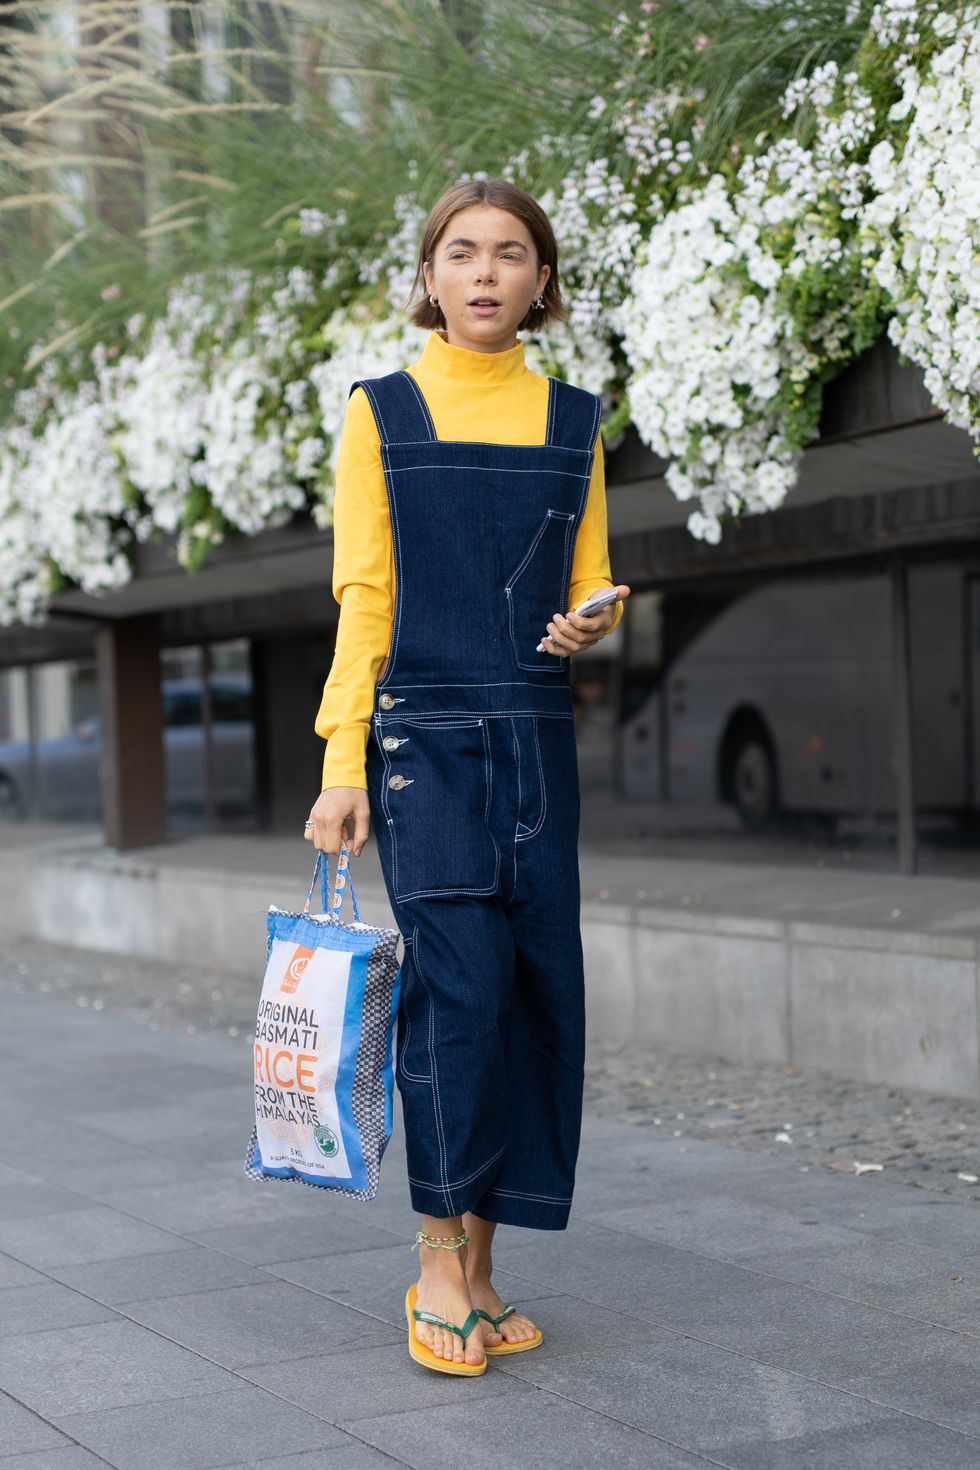 stockholm, sweden august 28 a guest is seen on the street during fashion week stockholm wearing blue overalls with yellow turtleneck and sandals on august 28, 2018 in stockholm, sweden photo by matthew sperzelgetty images